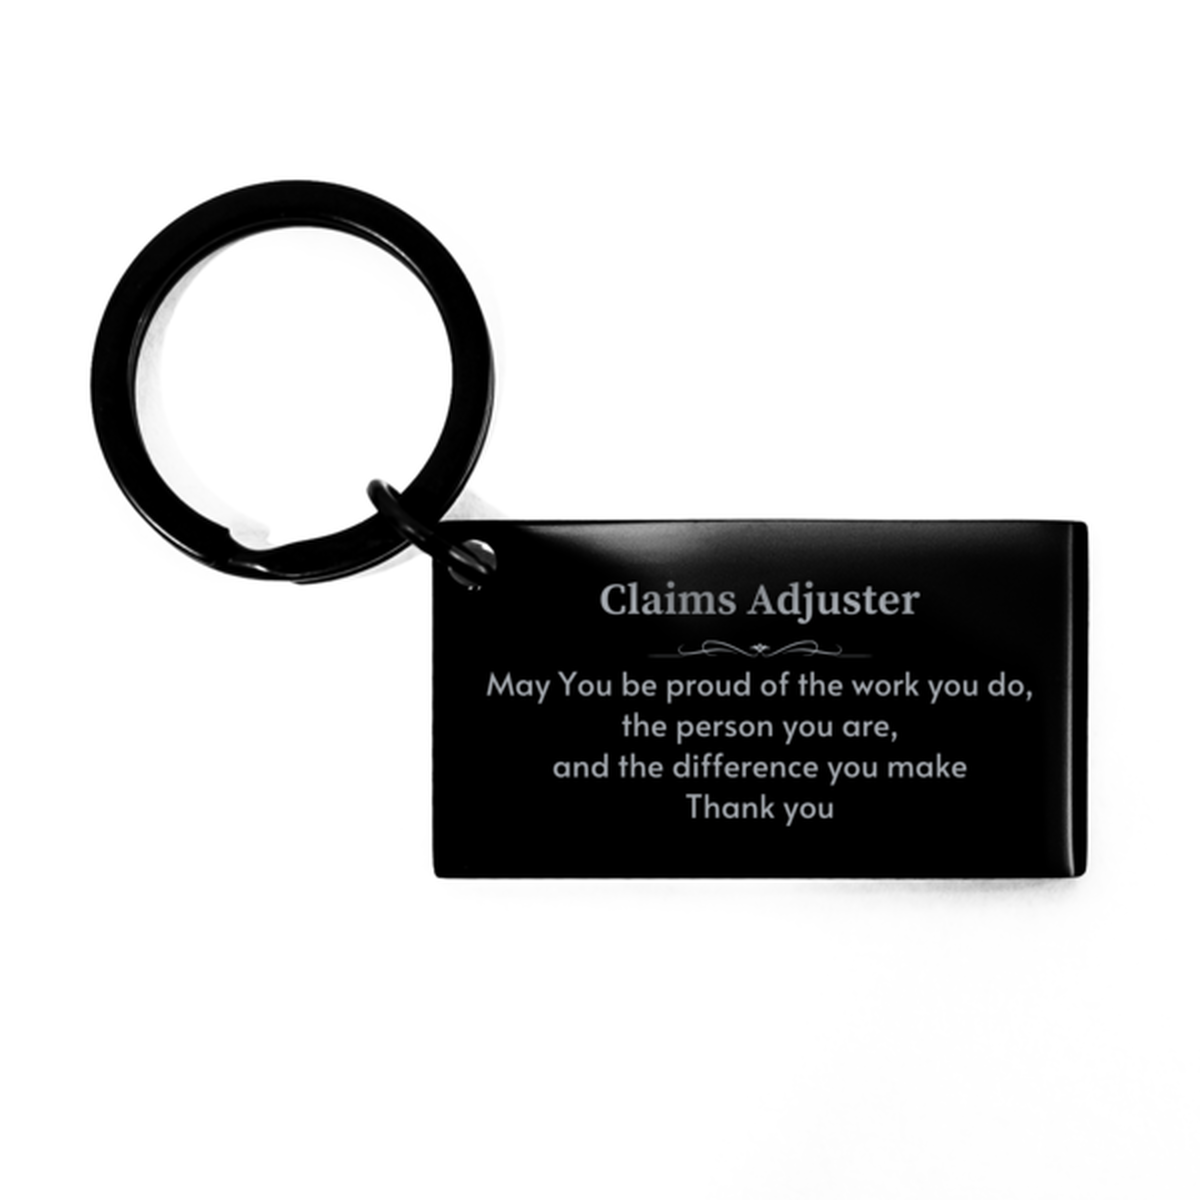 Heartwarming Keychain Retirement Coworkers Gifts for Claims Adjuster, Drafter May You be proud of the work you do, the person you are Gifts for Boss Men Women Friends